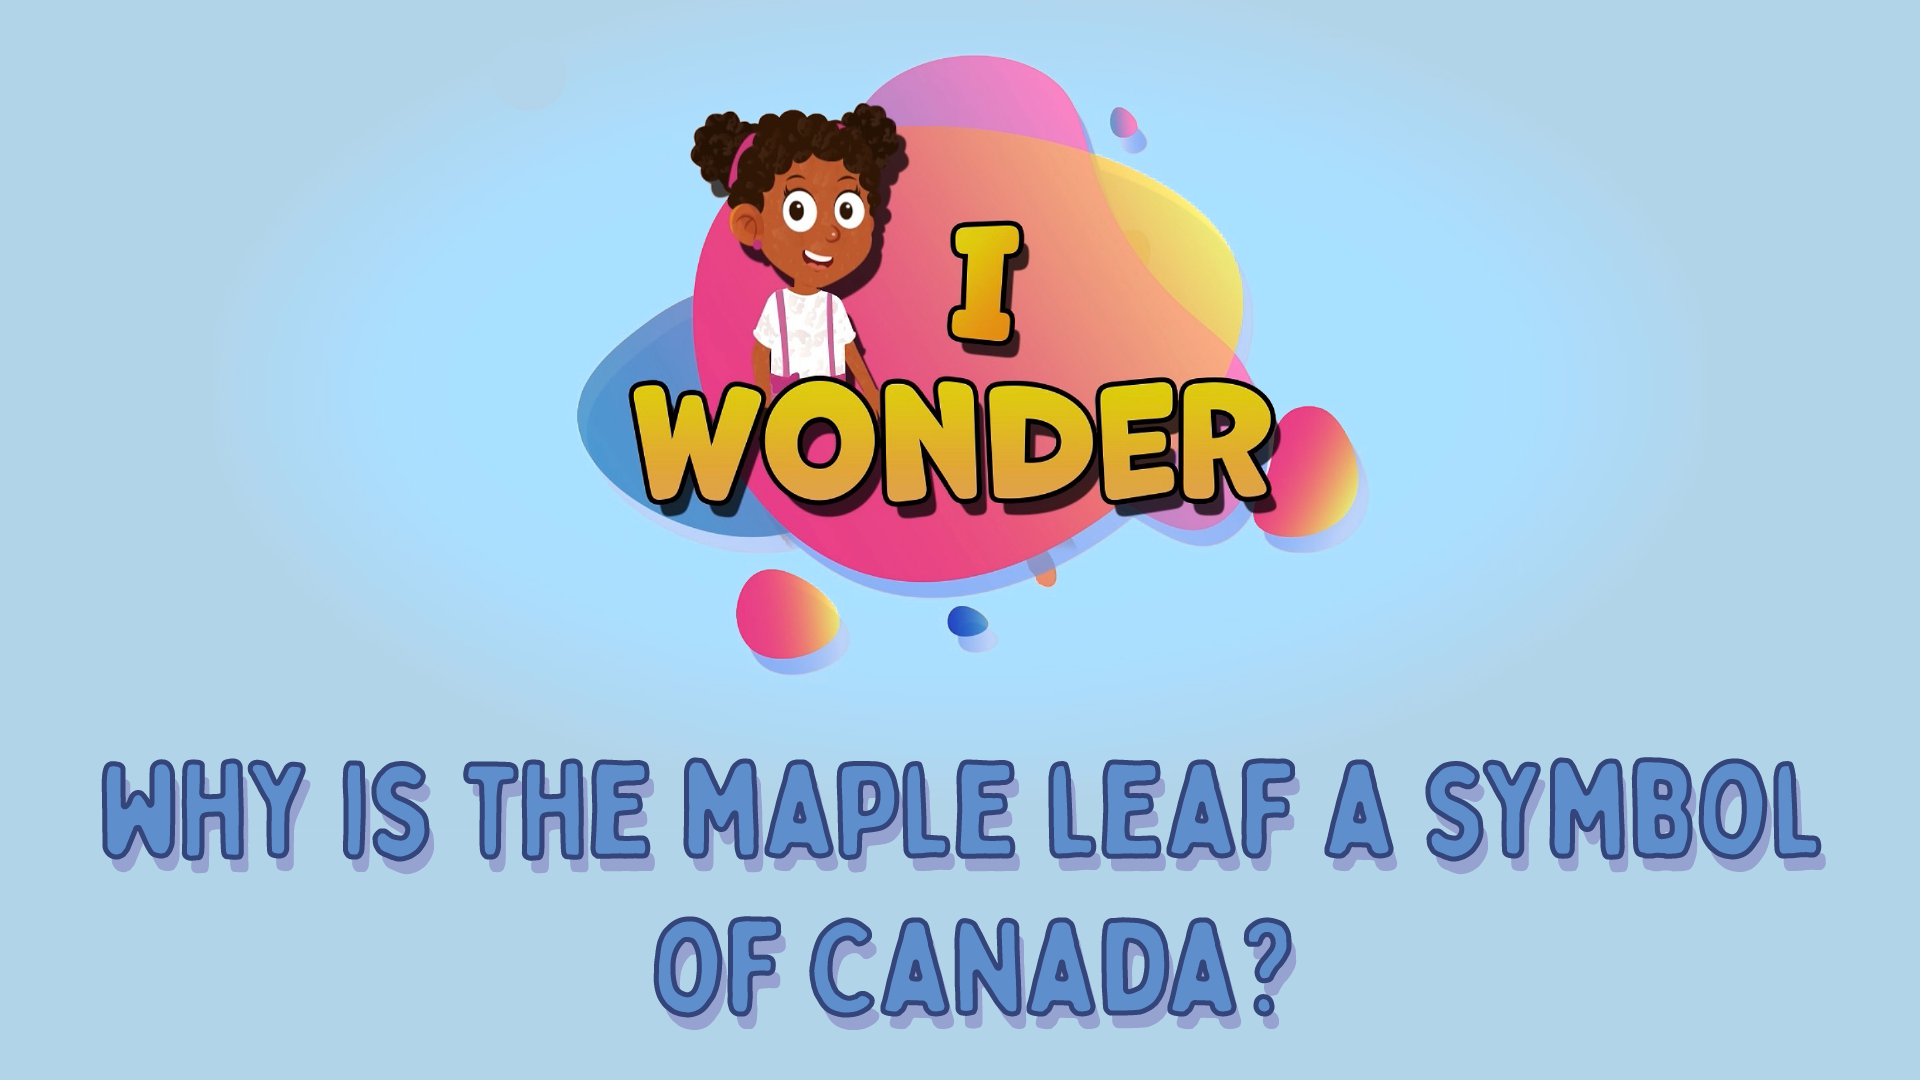 Why Is The Maple Leaf A Symbol Of Canada?